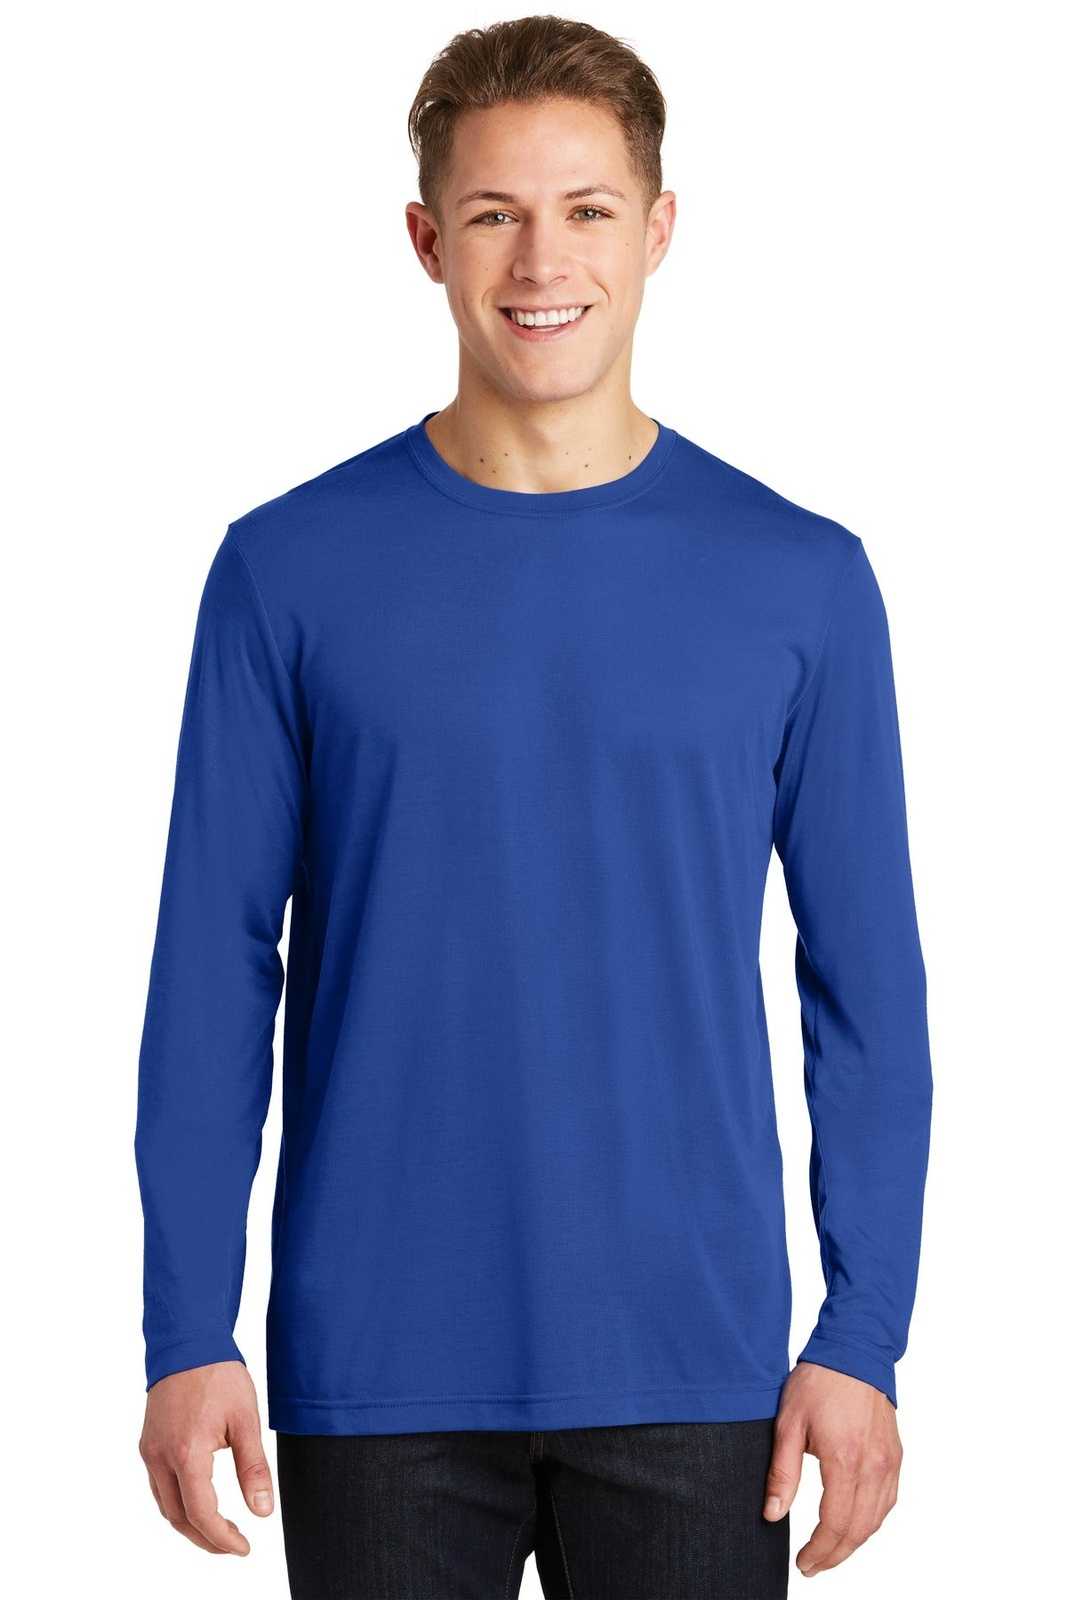 Sport-Tek ST450LS Long Sleeve PosiCharge Competitor Cotton Touch Tee 